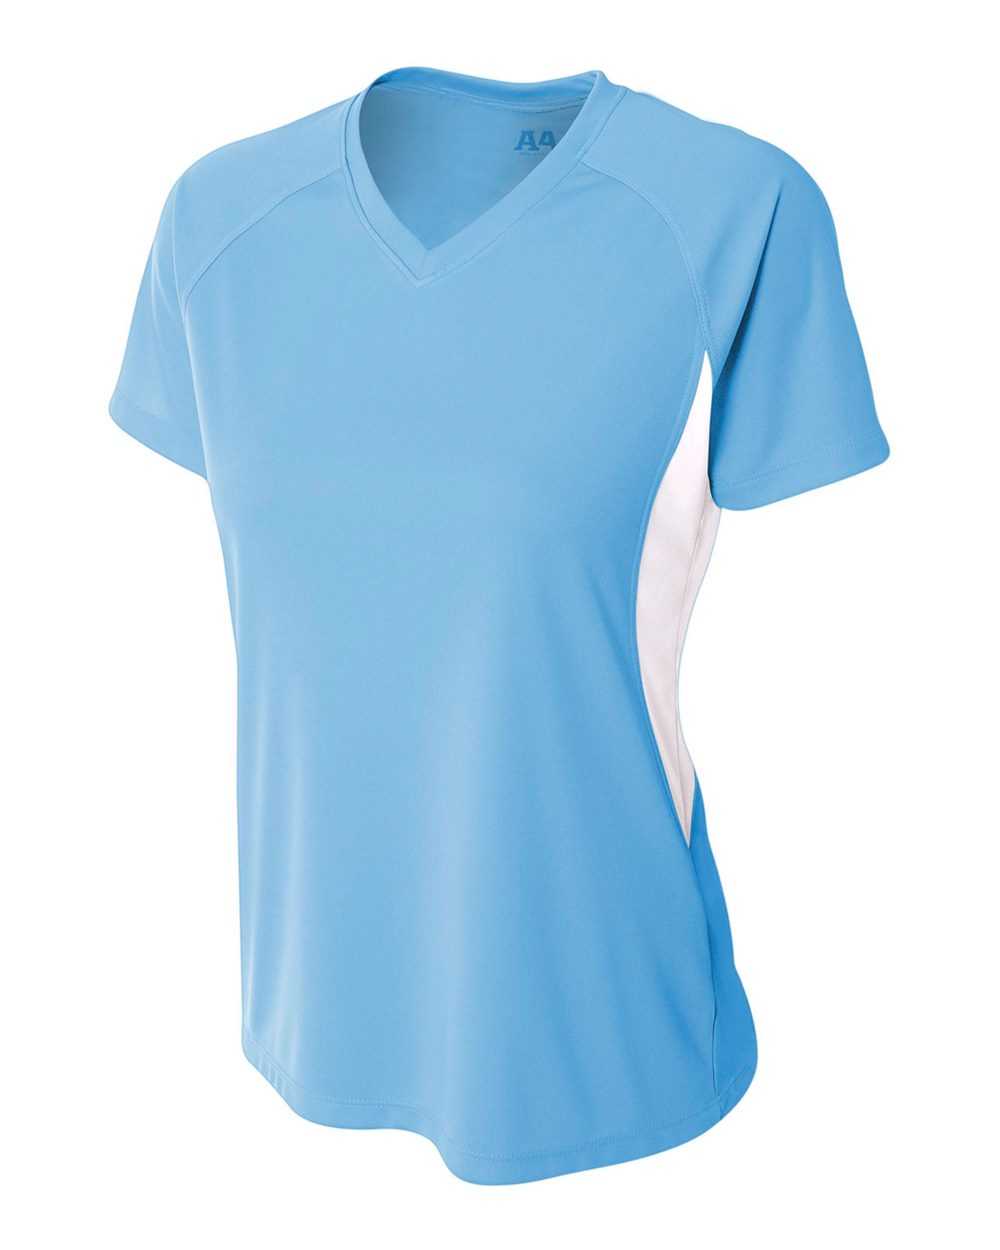 A4 NW3223 Women's Color Block Performance V-Neck - Light Blue White - HIT a Double